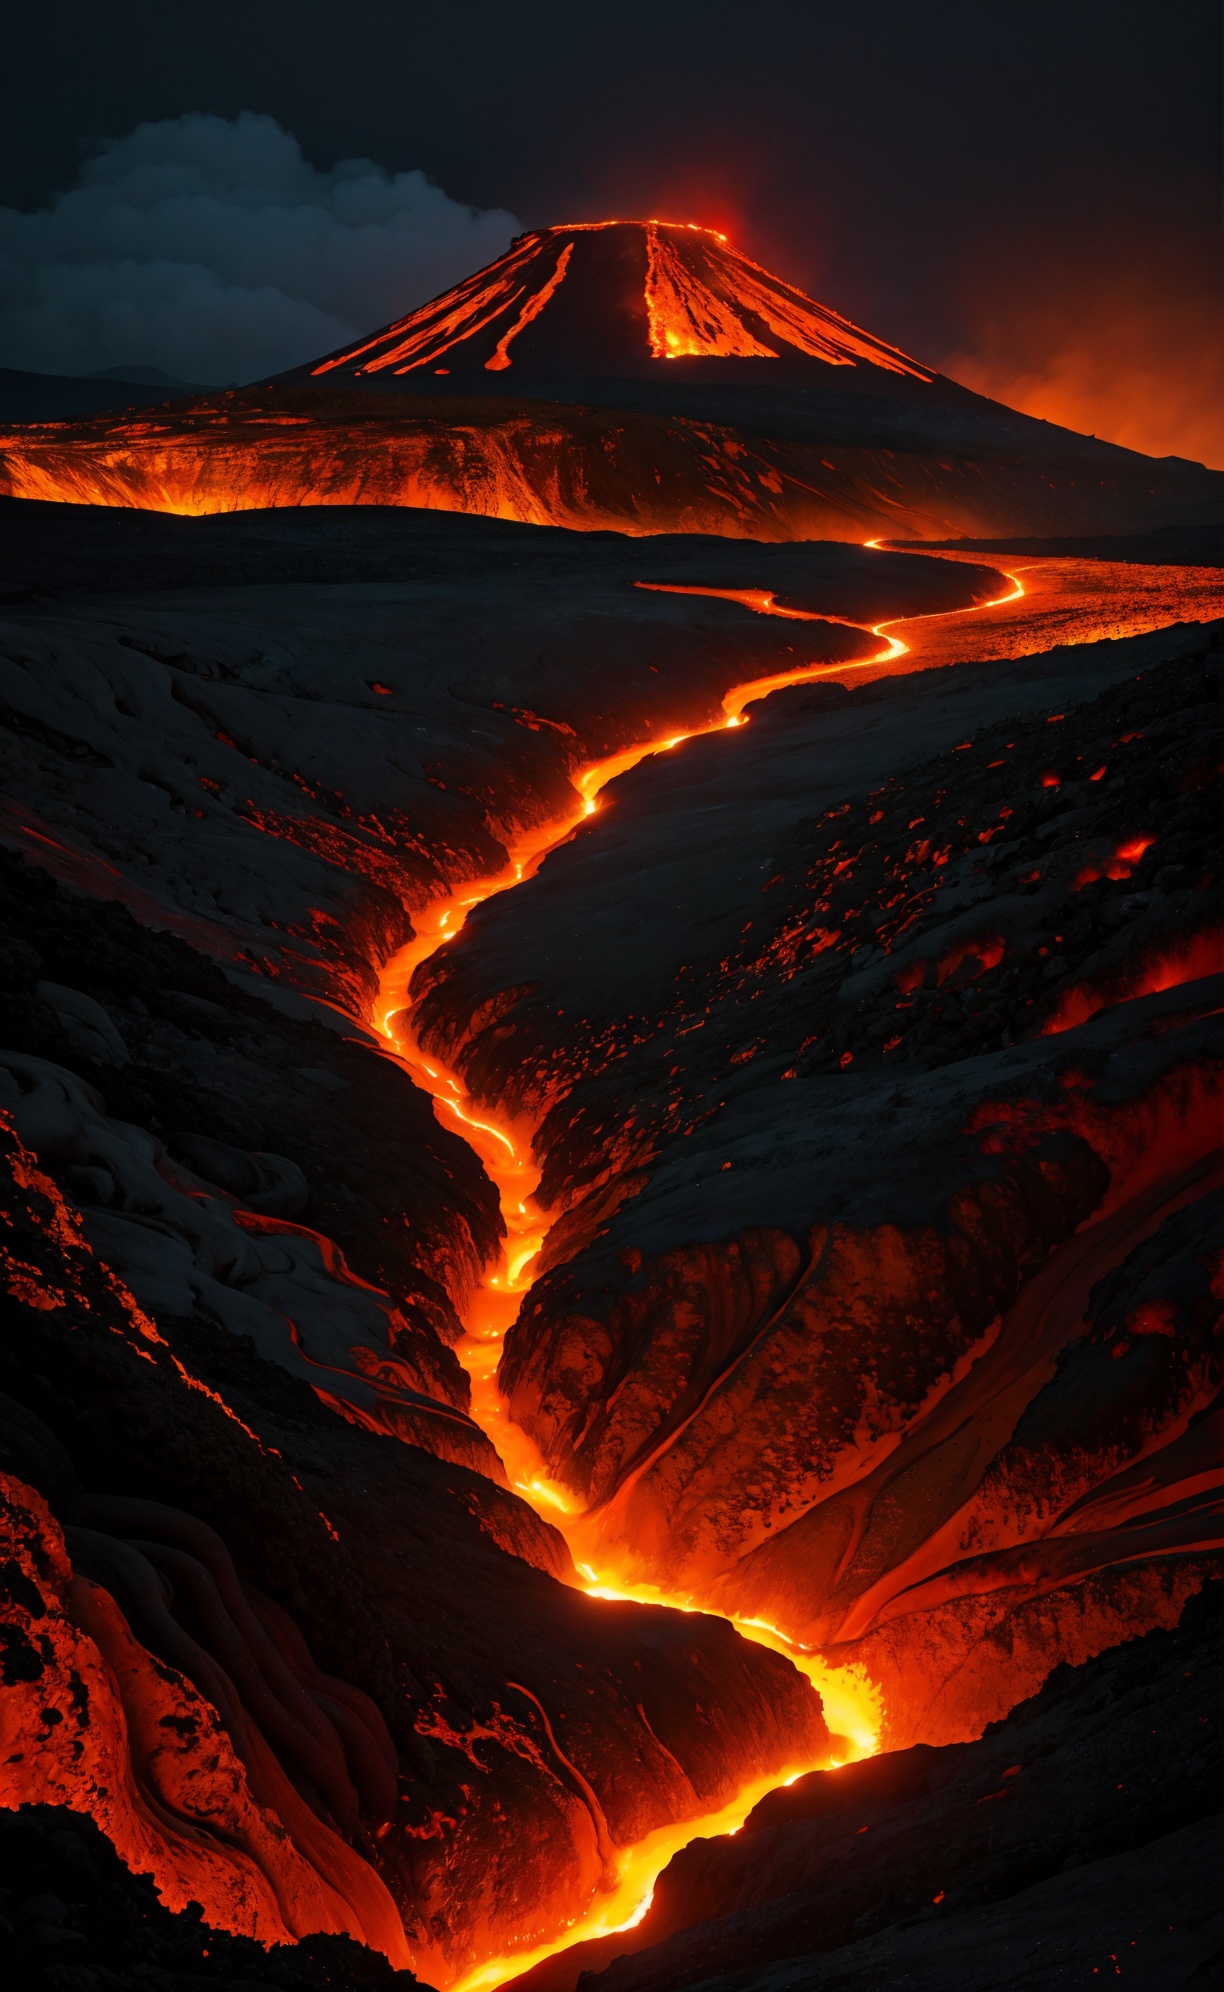 Spectacular, volcanic landscape, billowing smoke, fiery lava, molten rivers, glowing night, 9:16 vertical capture, apocalyptic scenery, award-winning image, Sony A7R IV, high dynamic range, dramatic contrast, dangerous beauty, inhospitable terrain, no life, otherworldly ambiance.